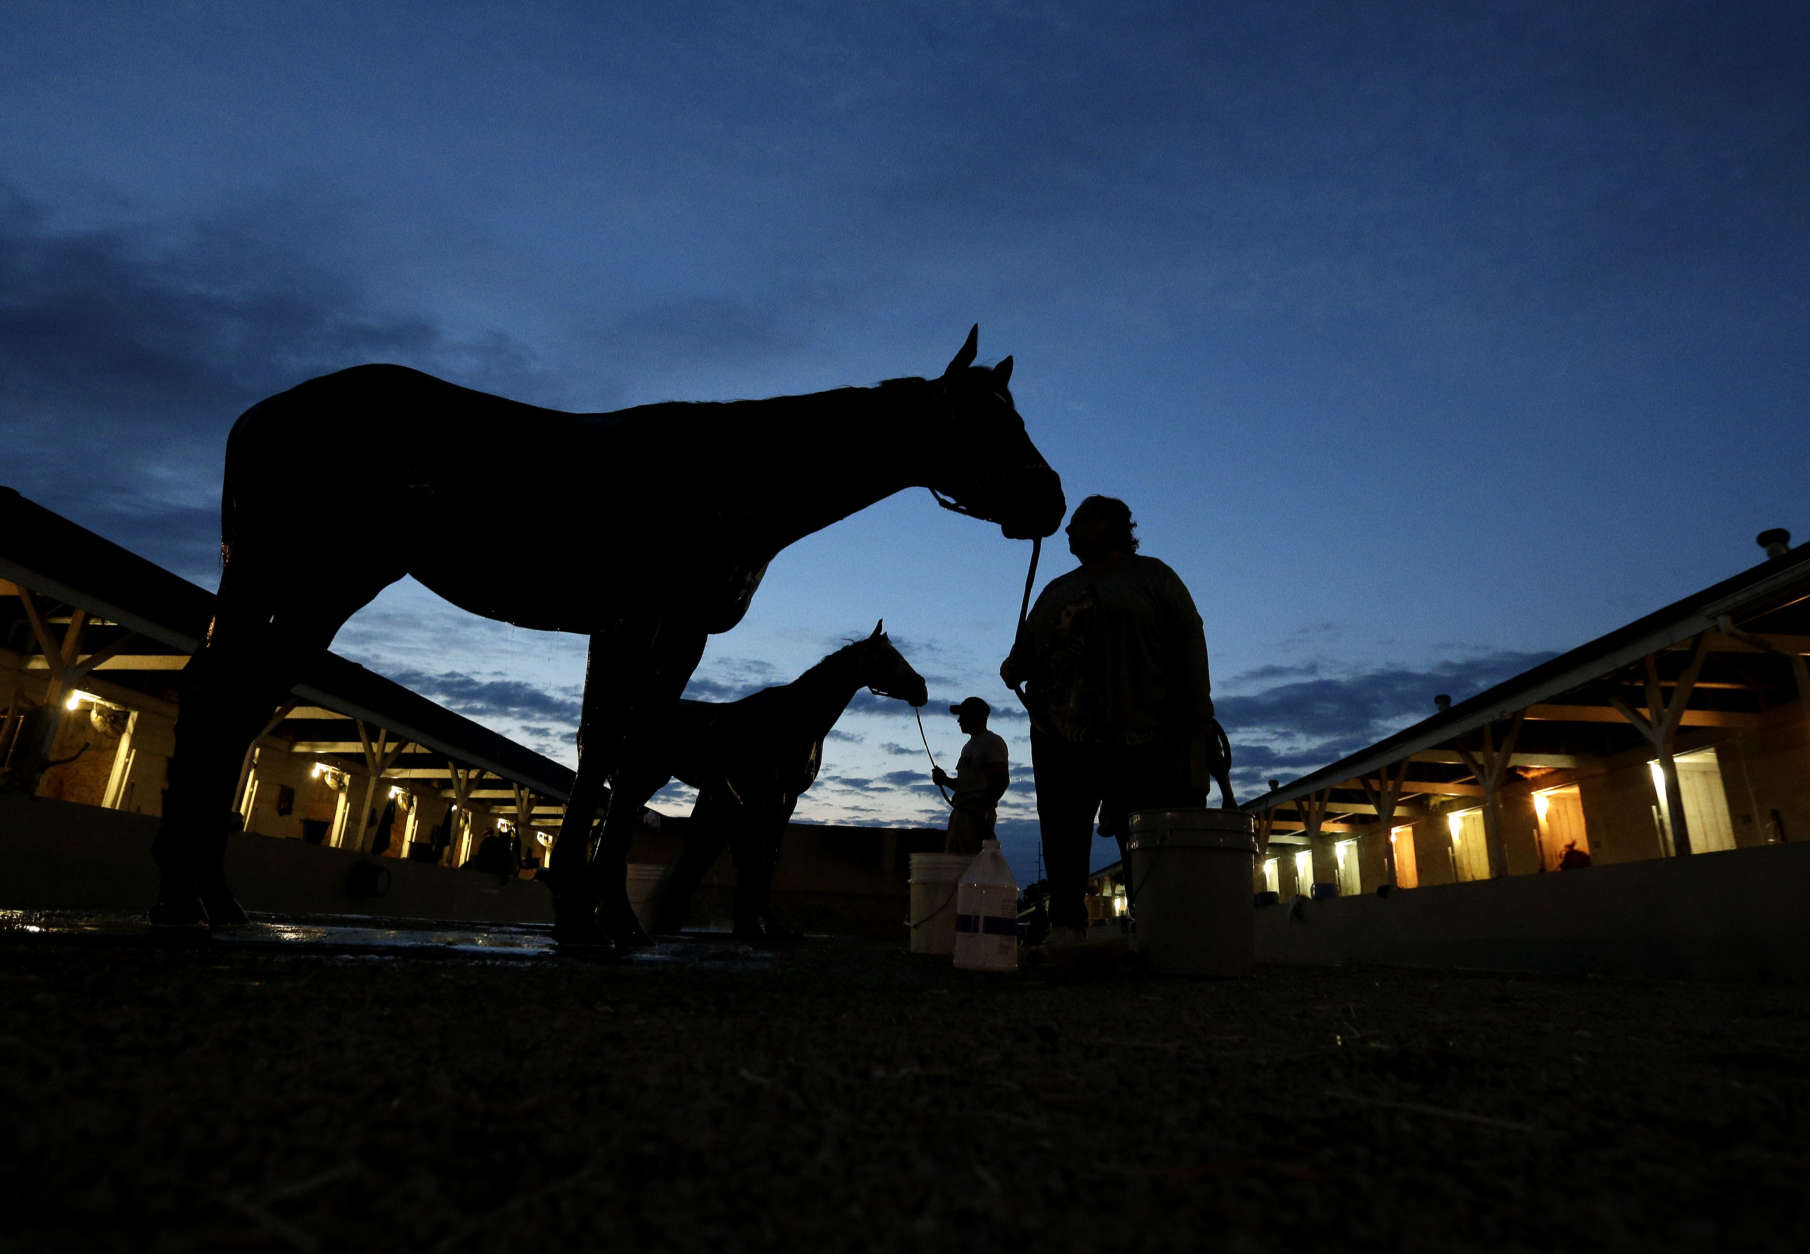 Horses await baths after an early-morning workout at Churchill Downs Wednesday, May 4, 2016, in Louisville, Ky. The 142nd running of the Kentucky Derby is scheduled for Saturday, May 7. (AP Photo/Charlie Riedel)